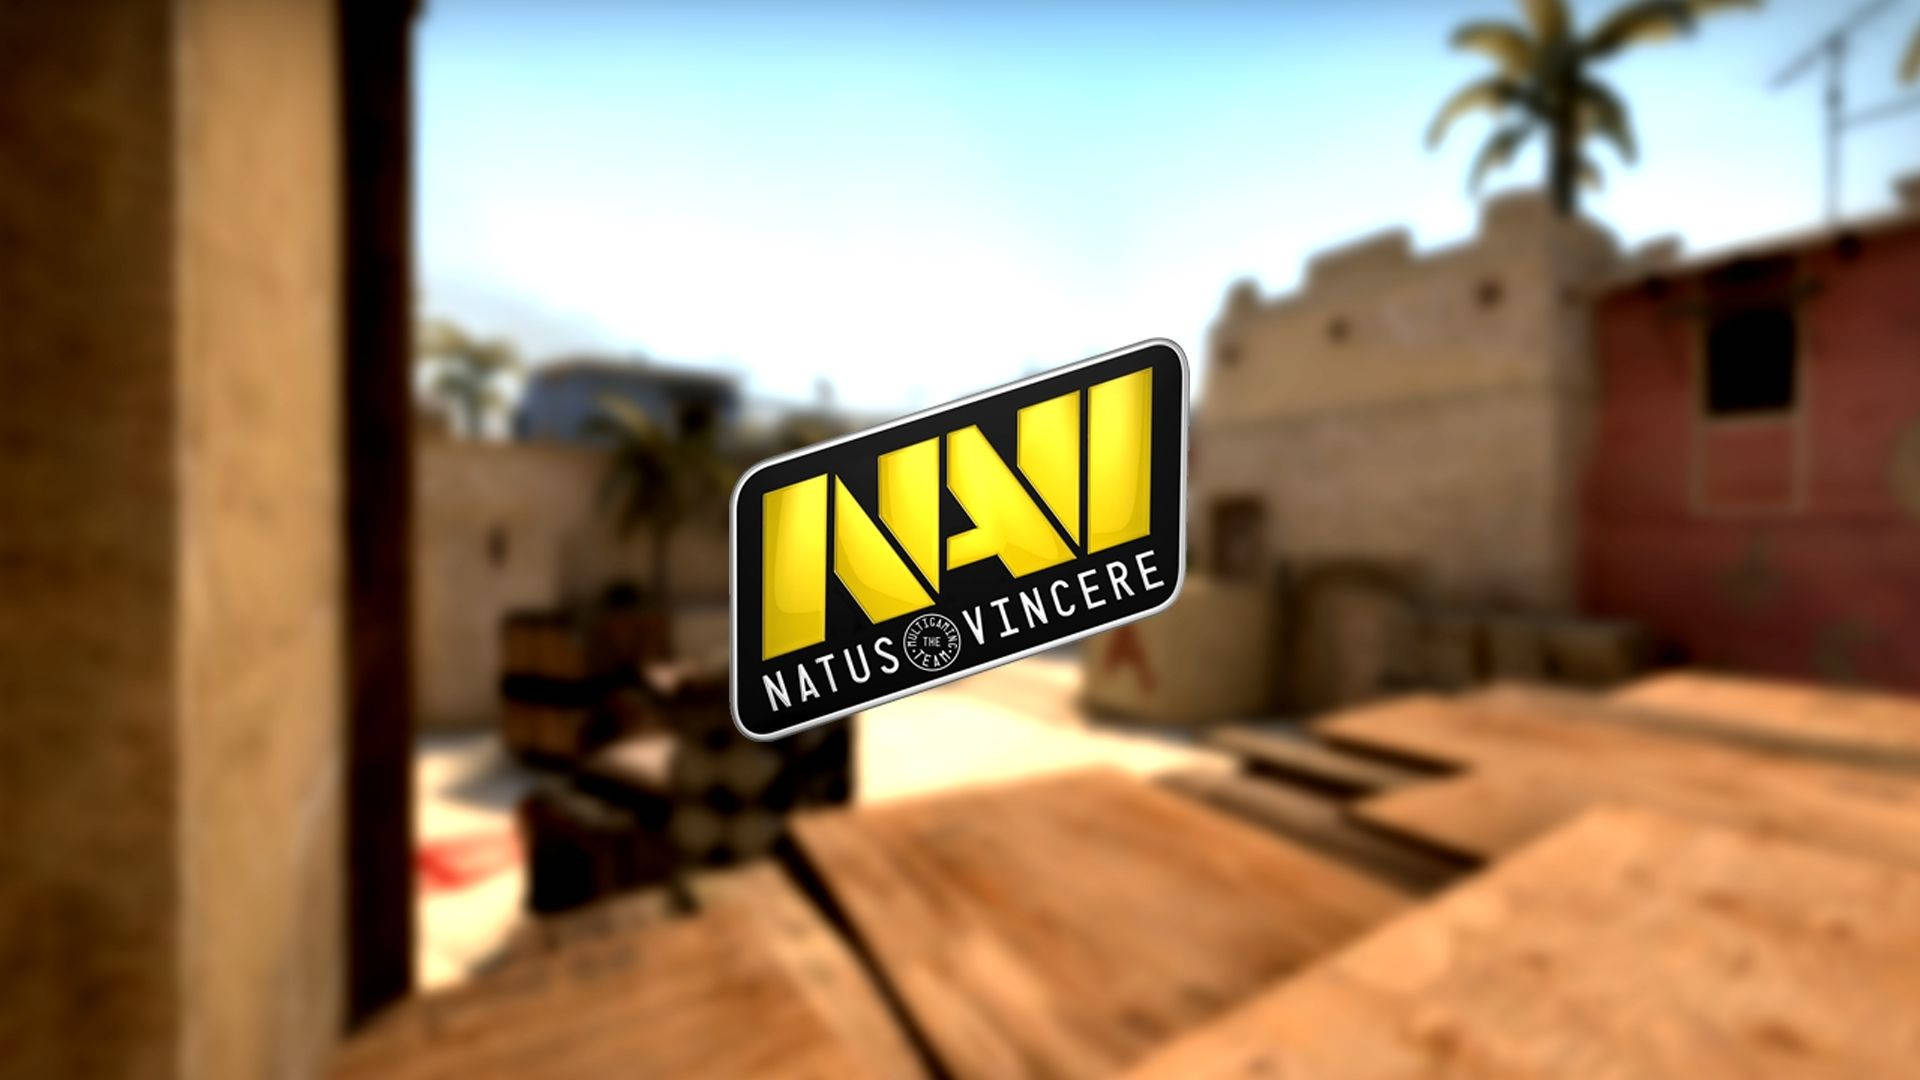 Natus Vincere On The Battlefield Background